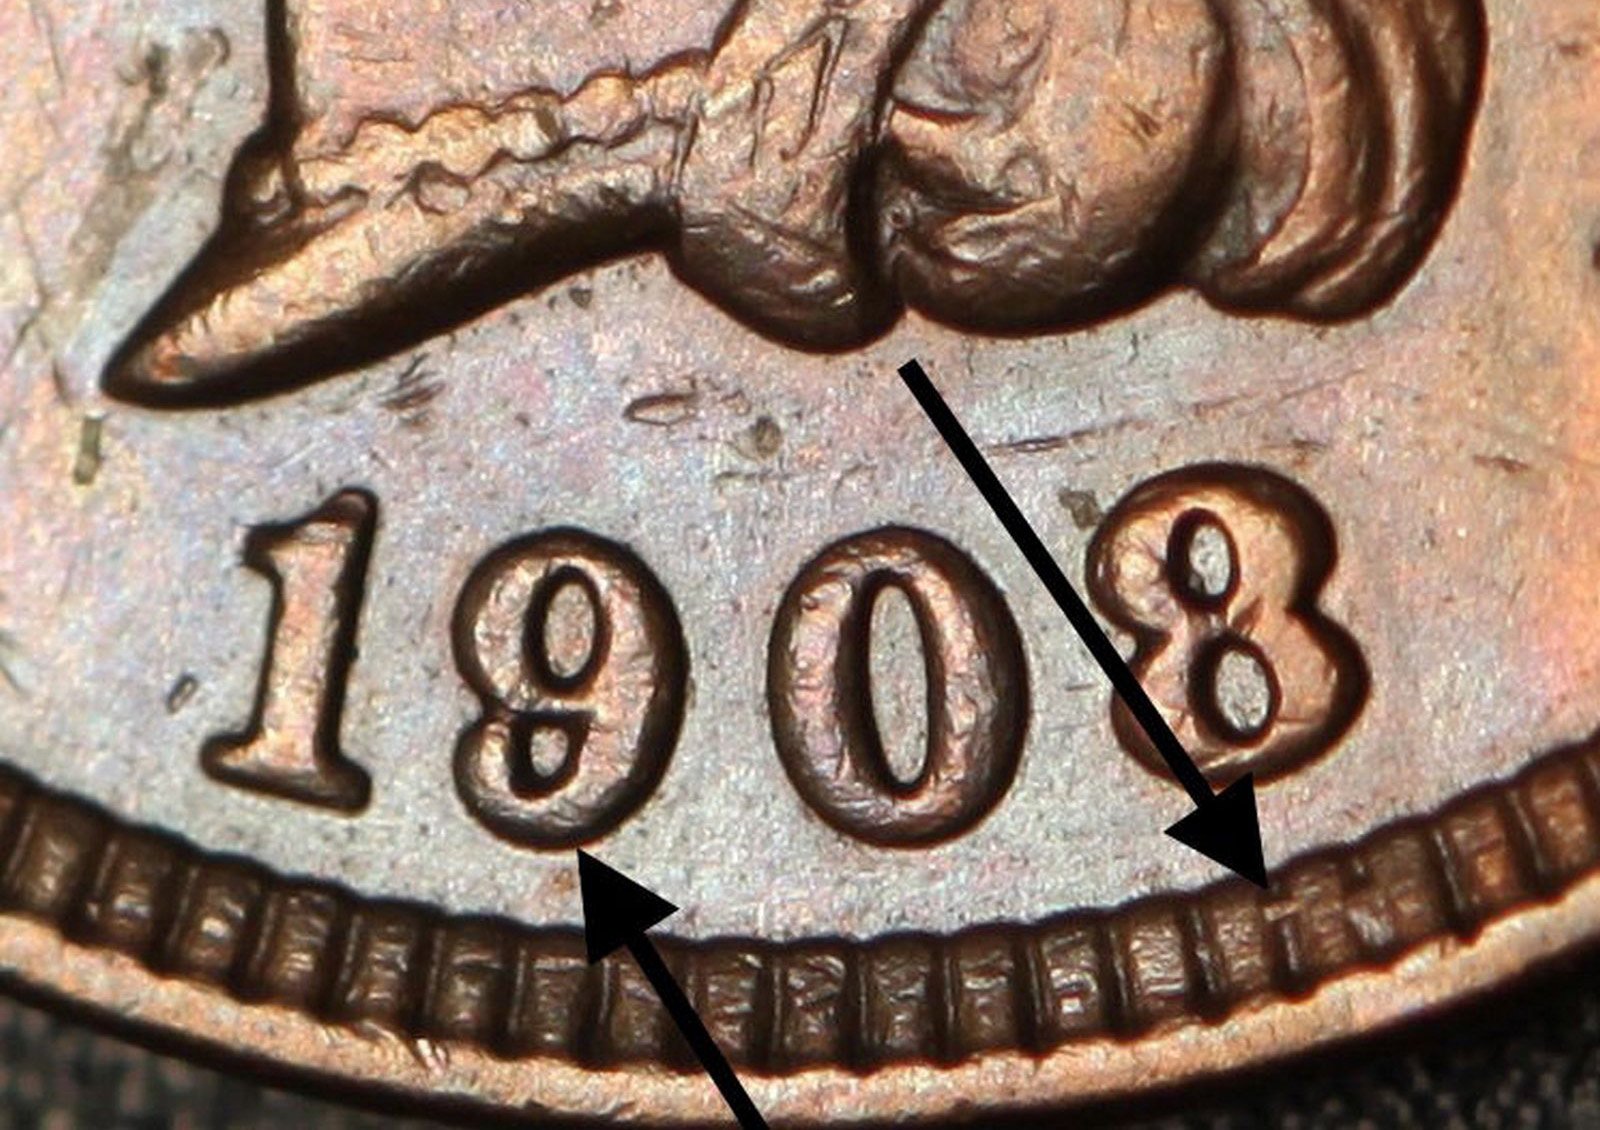 1908 MPD-006 - Indian Head Penny - Photo by Ed Nathanson